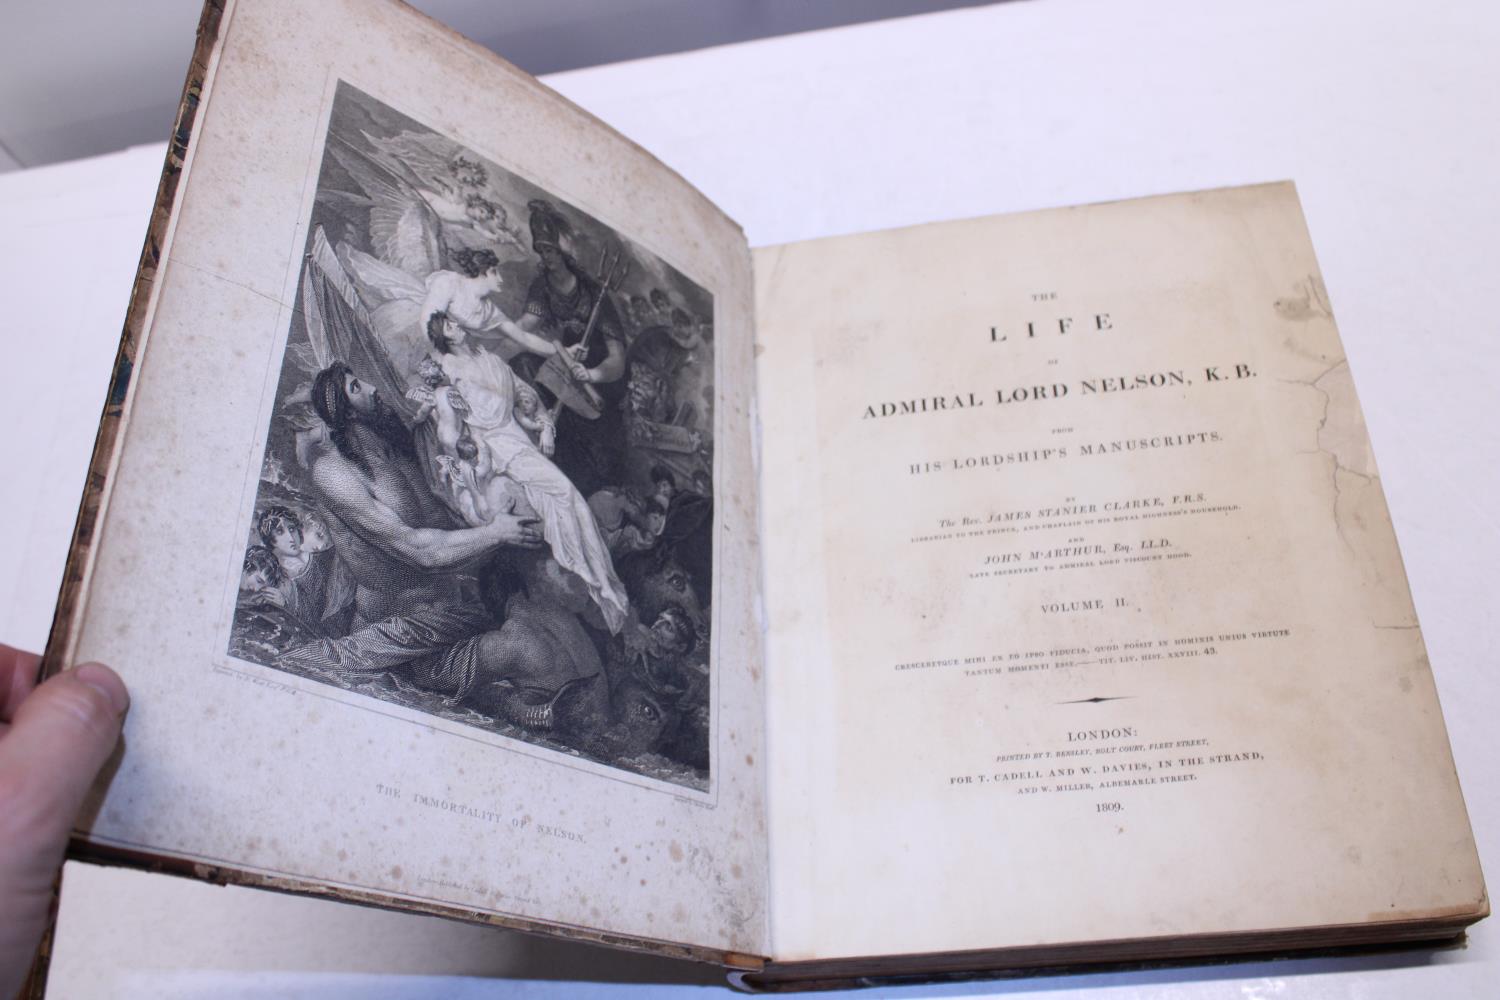 A two volume set 'The Life of Admiral Lord Nelson' From his lordships manuscripts by The Rev James - Image 5 of 6